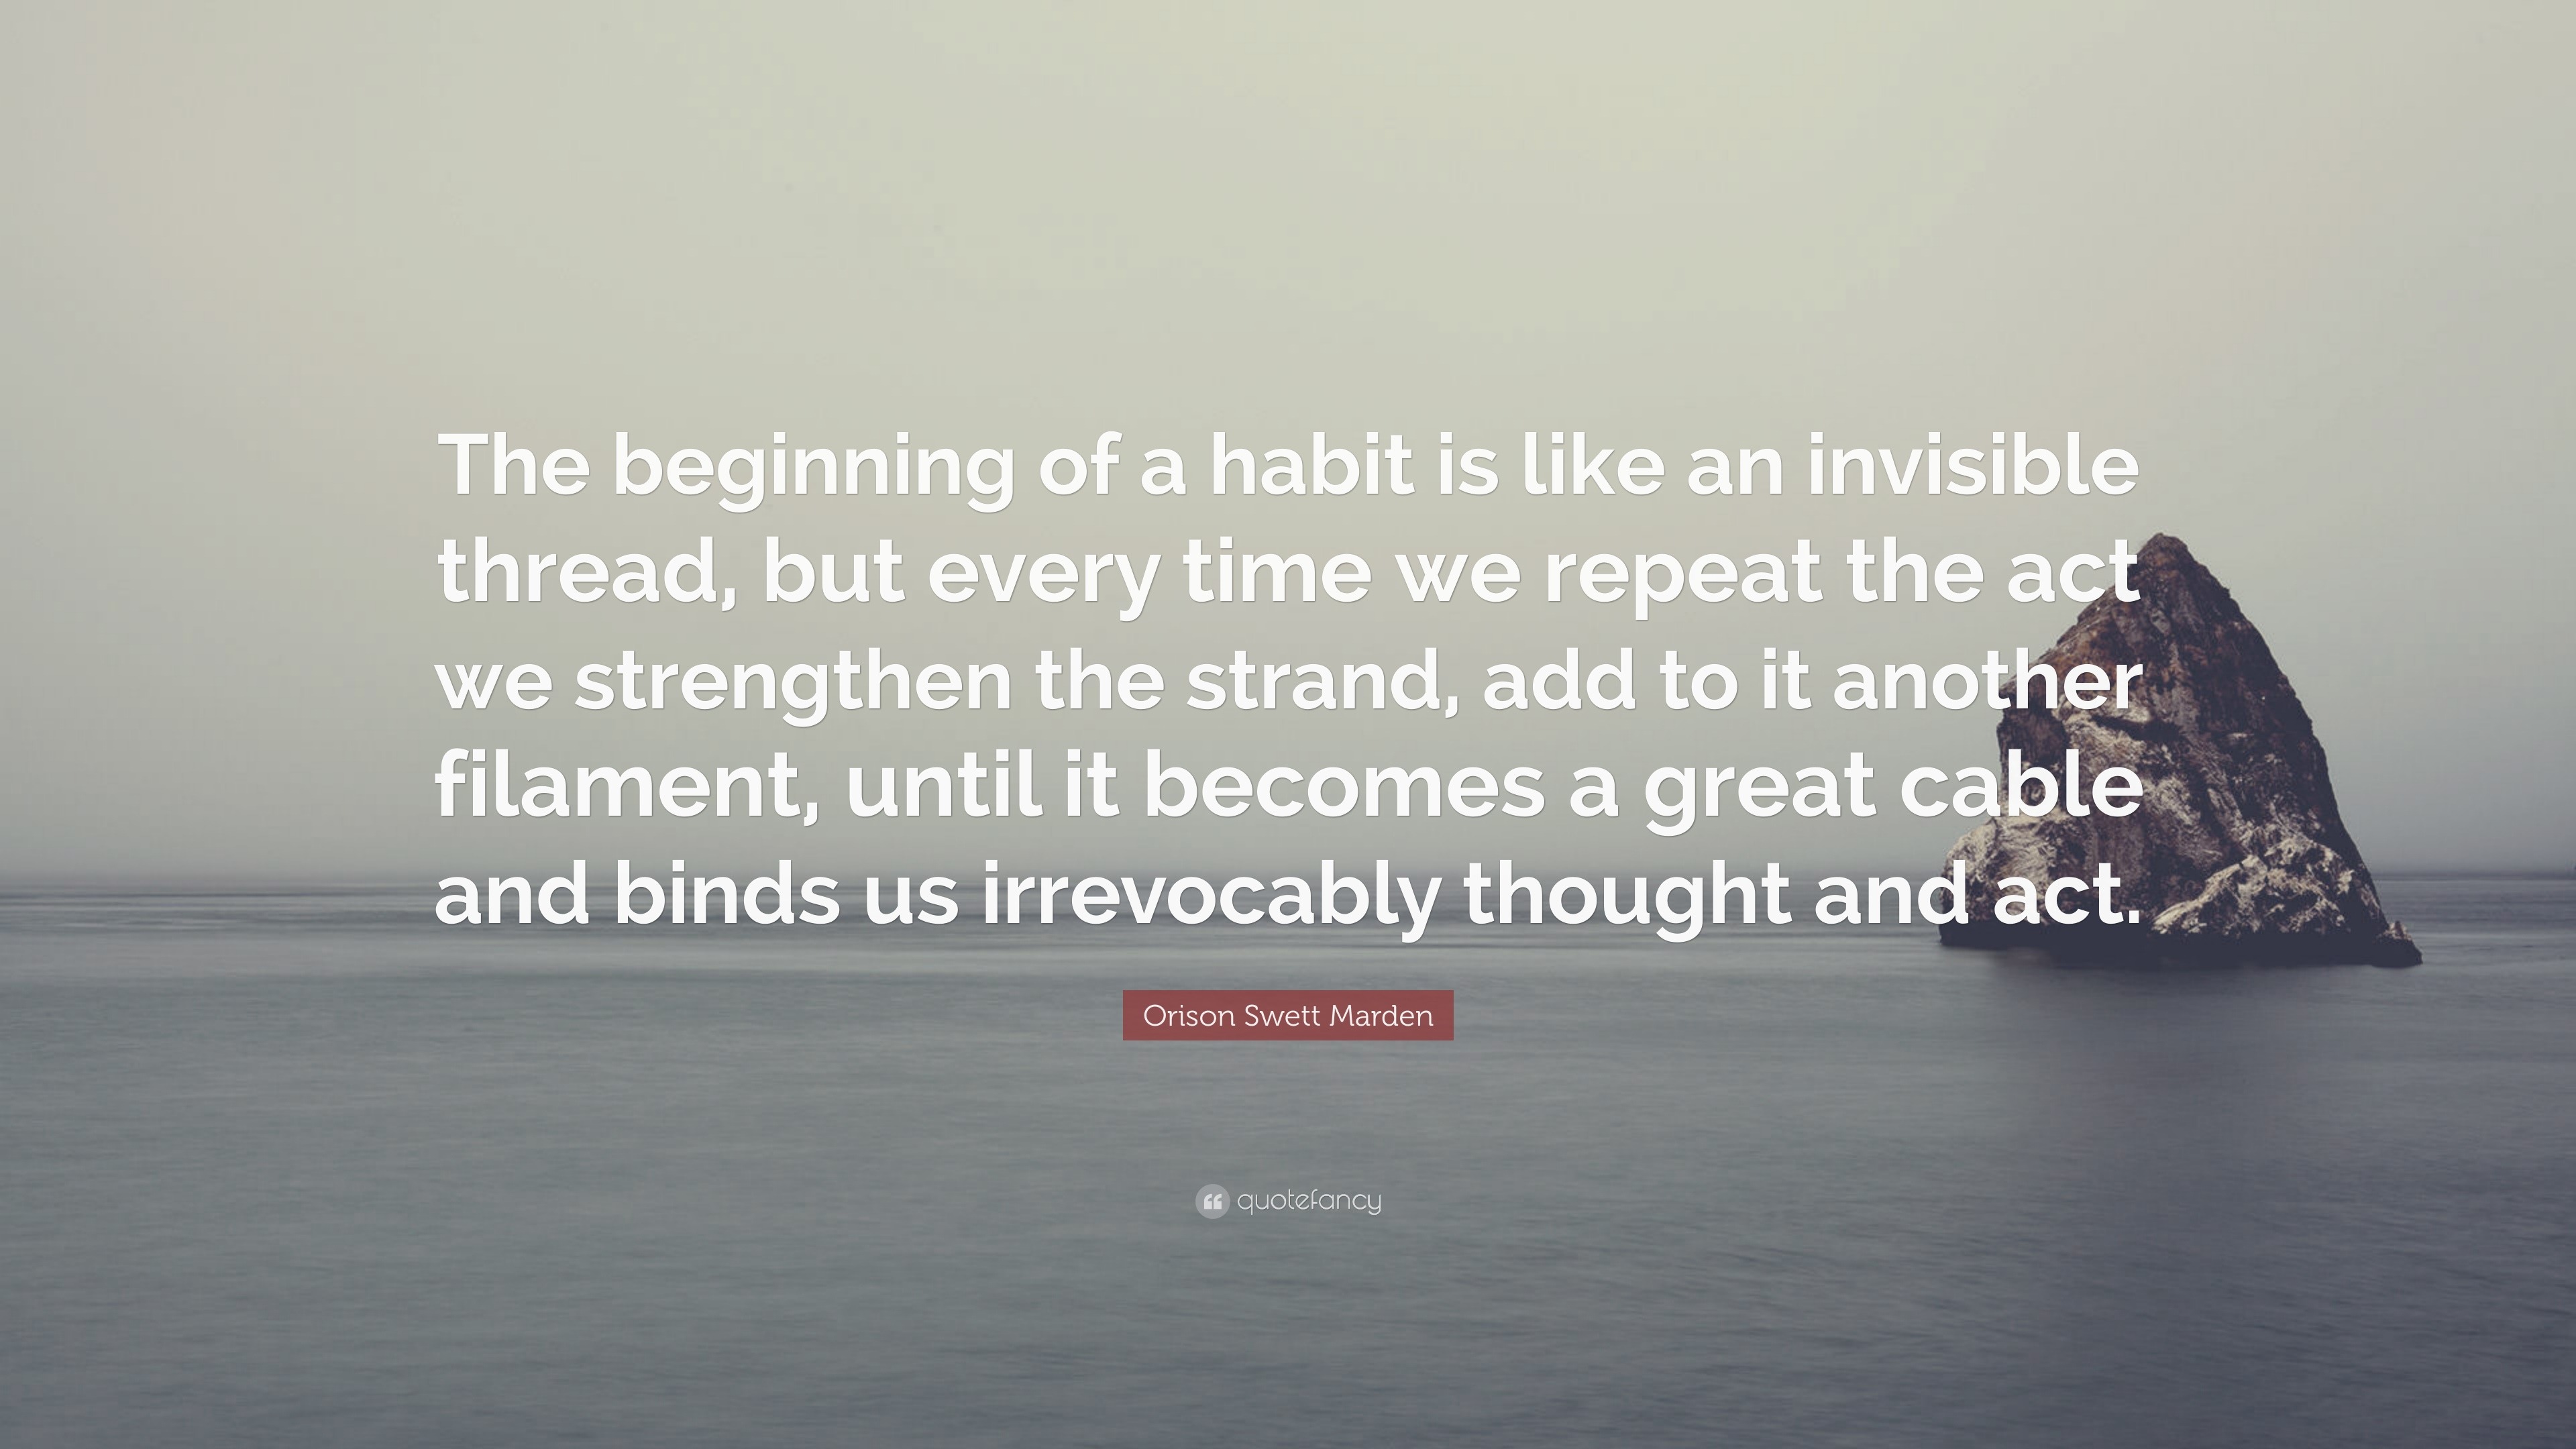 Orison Swett Marden Quote: “The beginning of a habit is like an invisible  thread, but every time we repeat the act we strengthen the strand, add to  ”